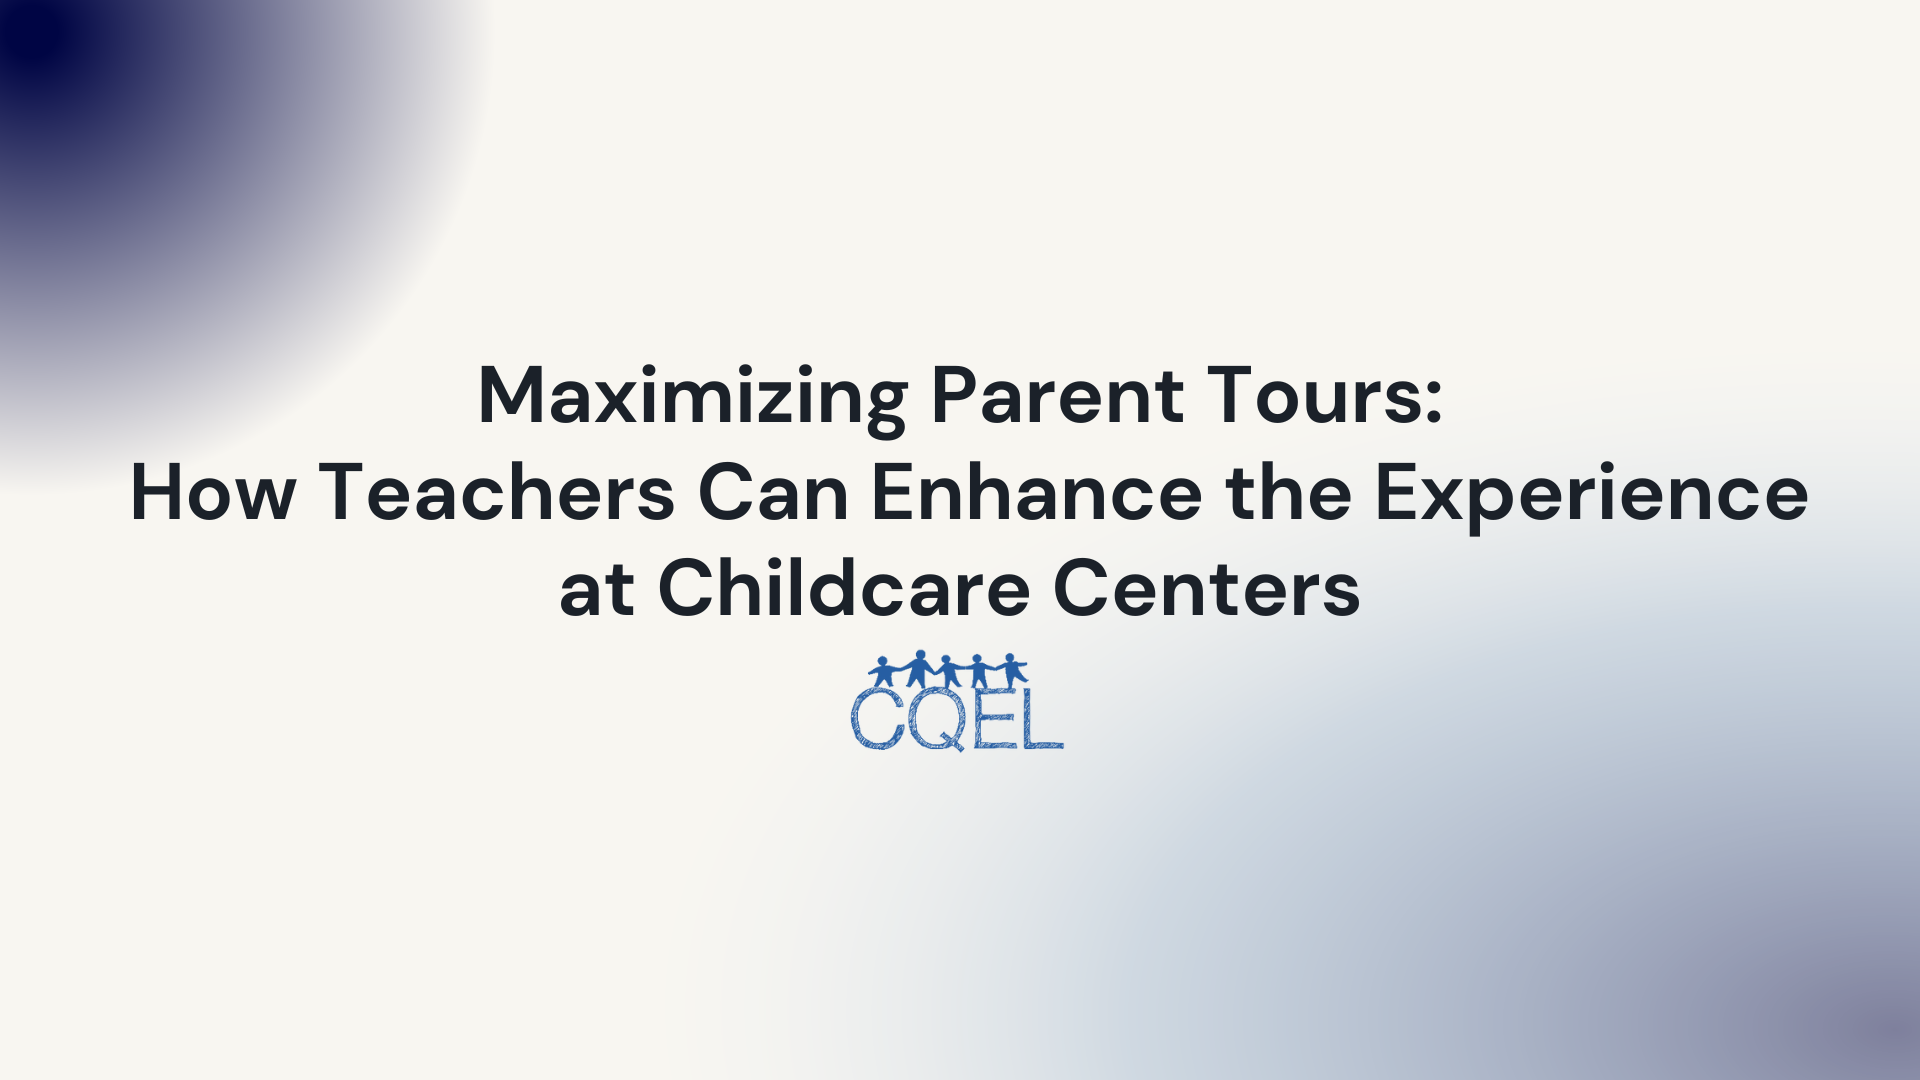 Maximizing Parent Tours: How Teachers Can Enhance the Experience at Childcare Centers